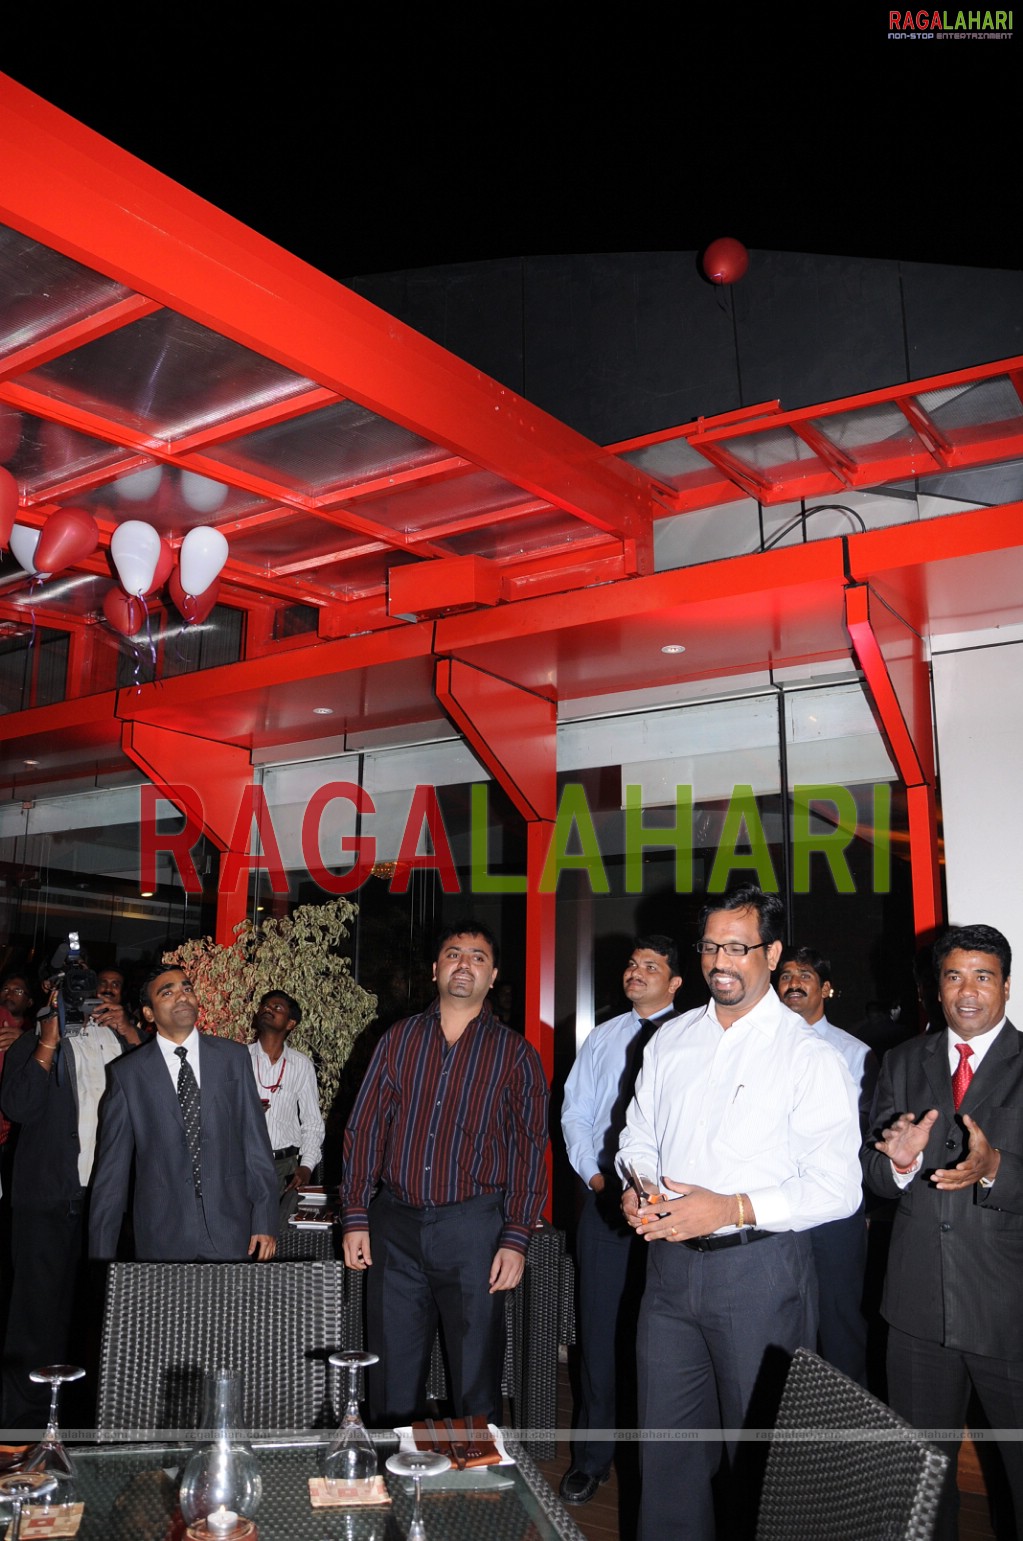 Terrace Barbeque  launch at Necklace Road, Hyderabad